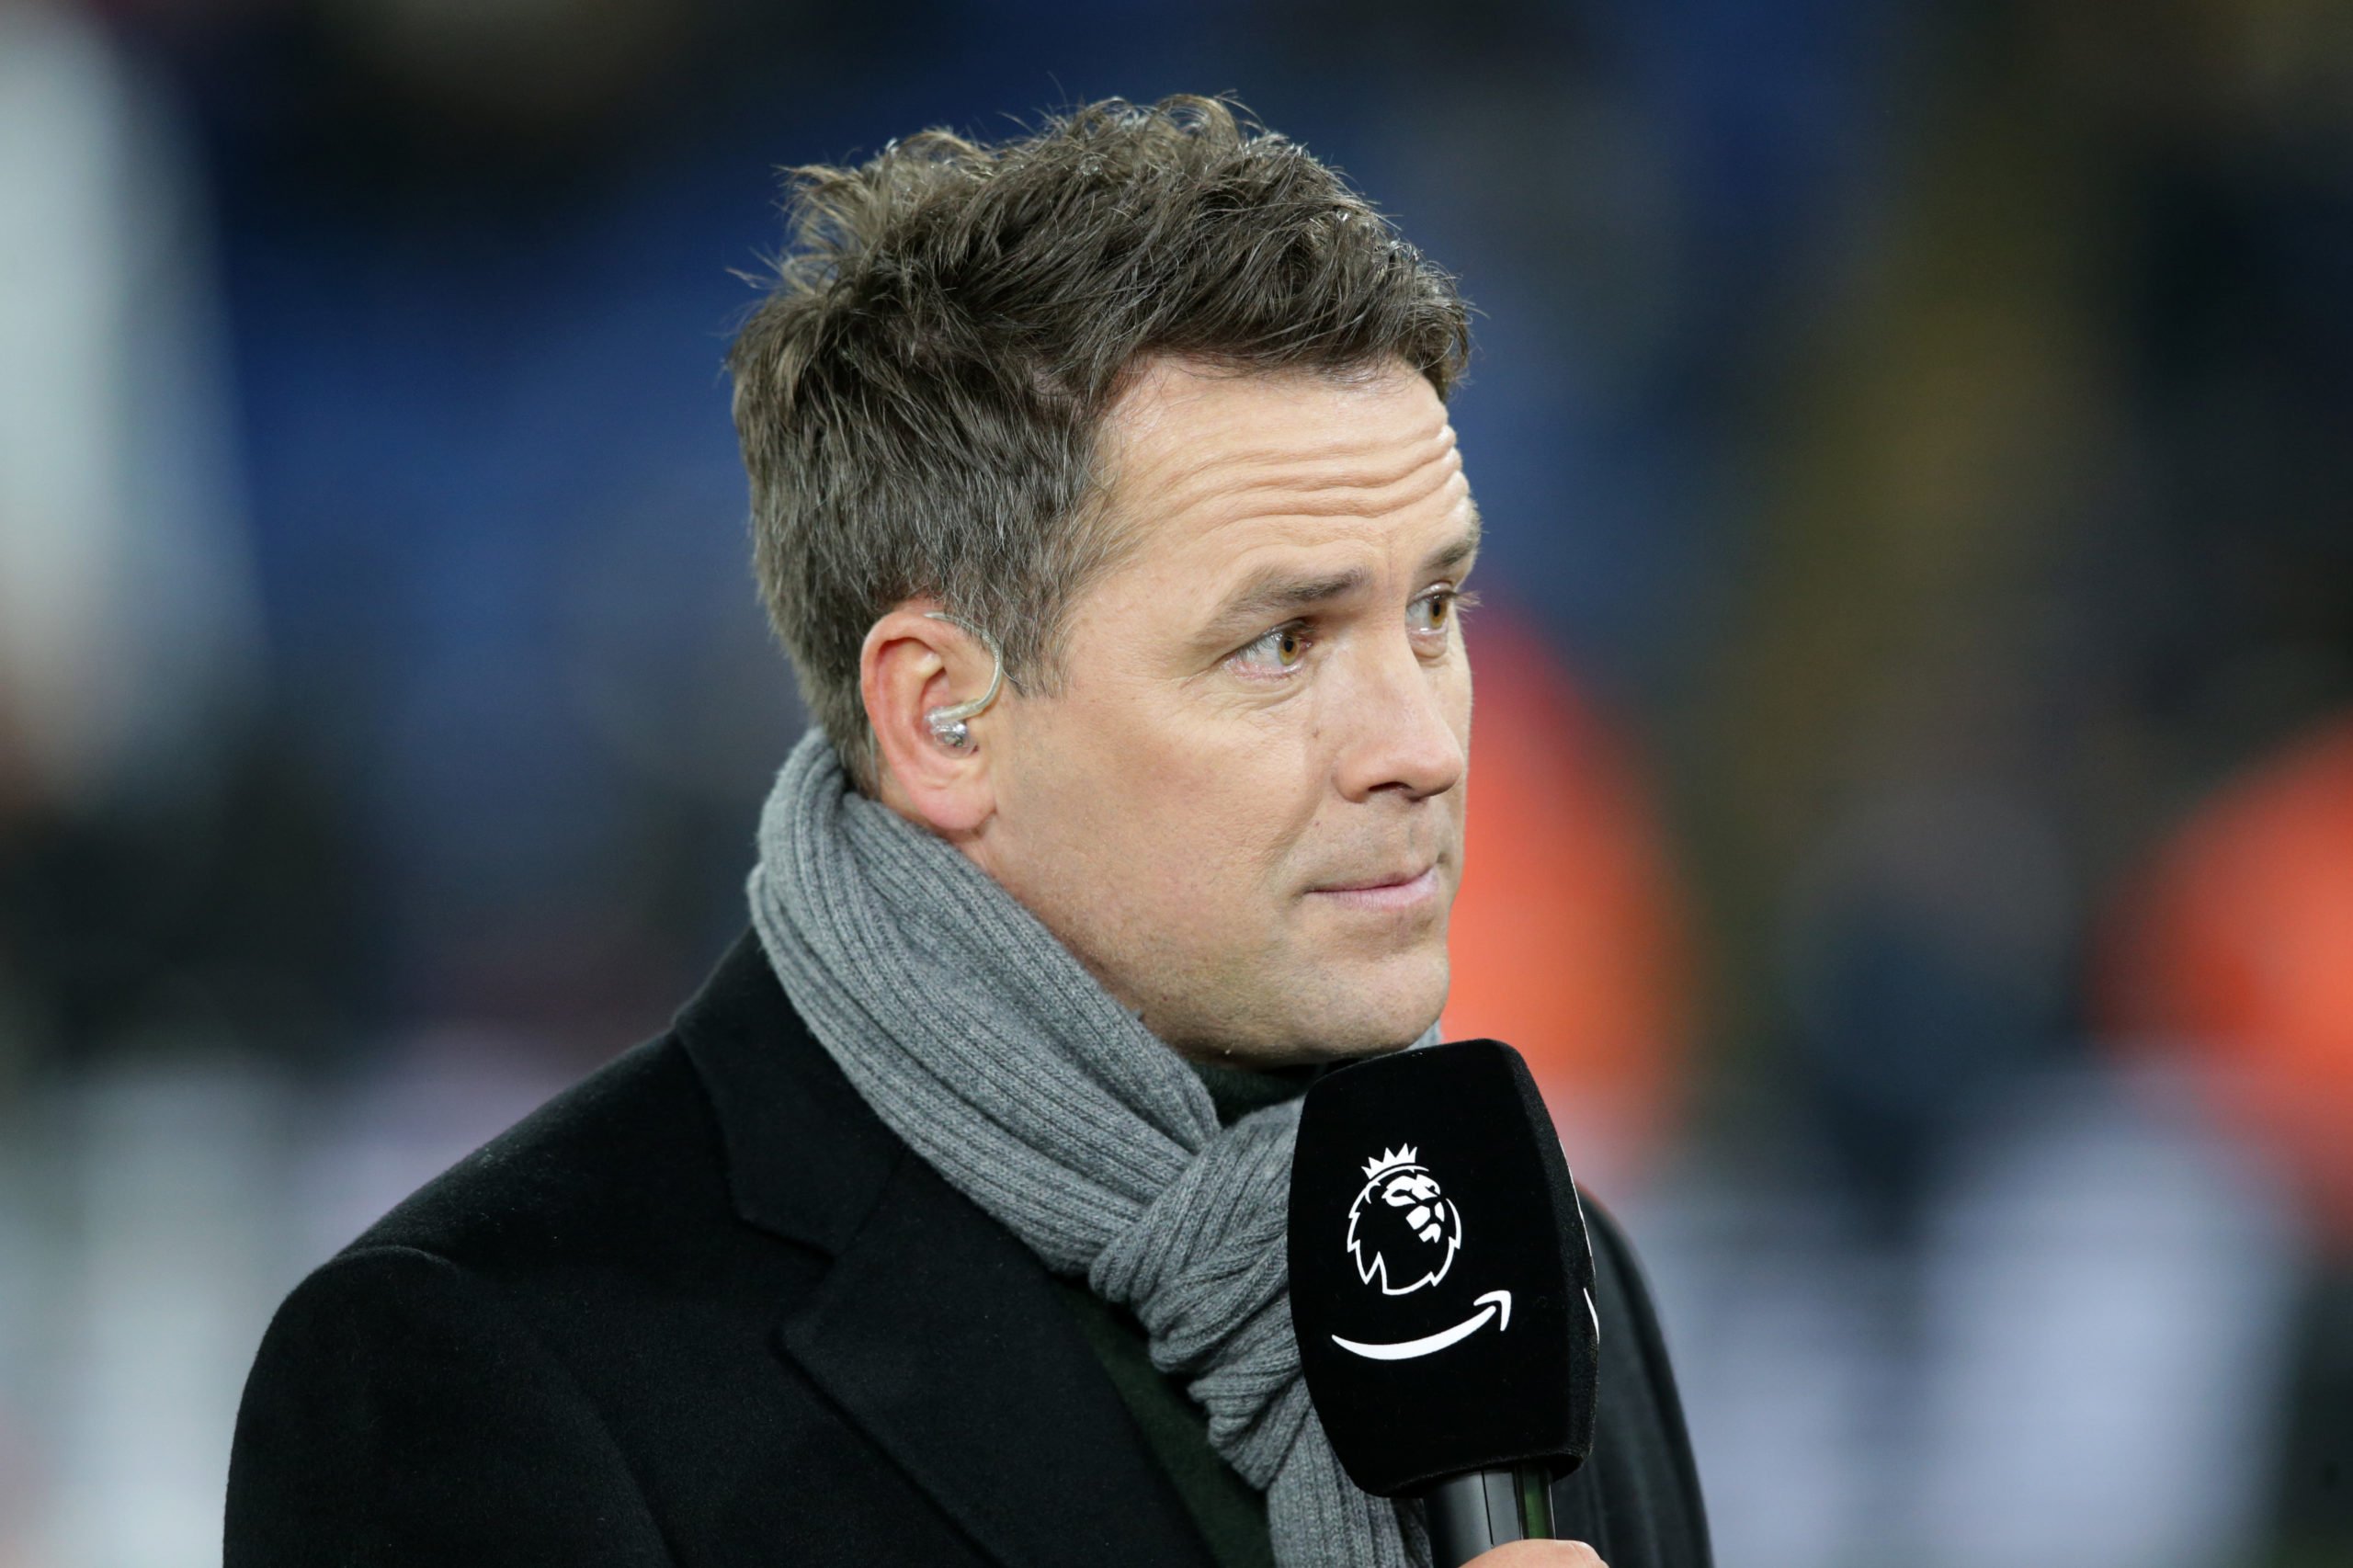 'Wow': Michael Owen makes PL title claim ahead of Chelsea's game against Liverpool